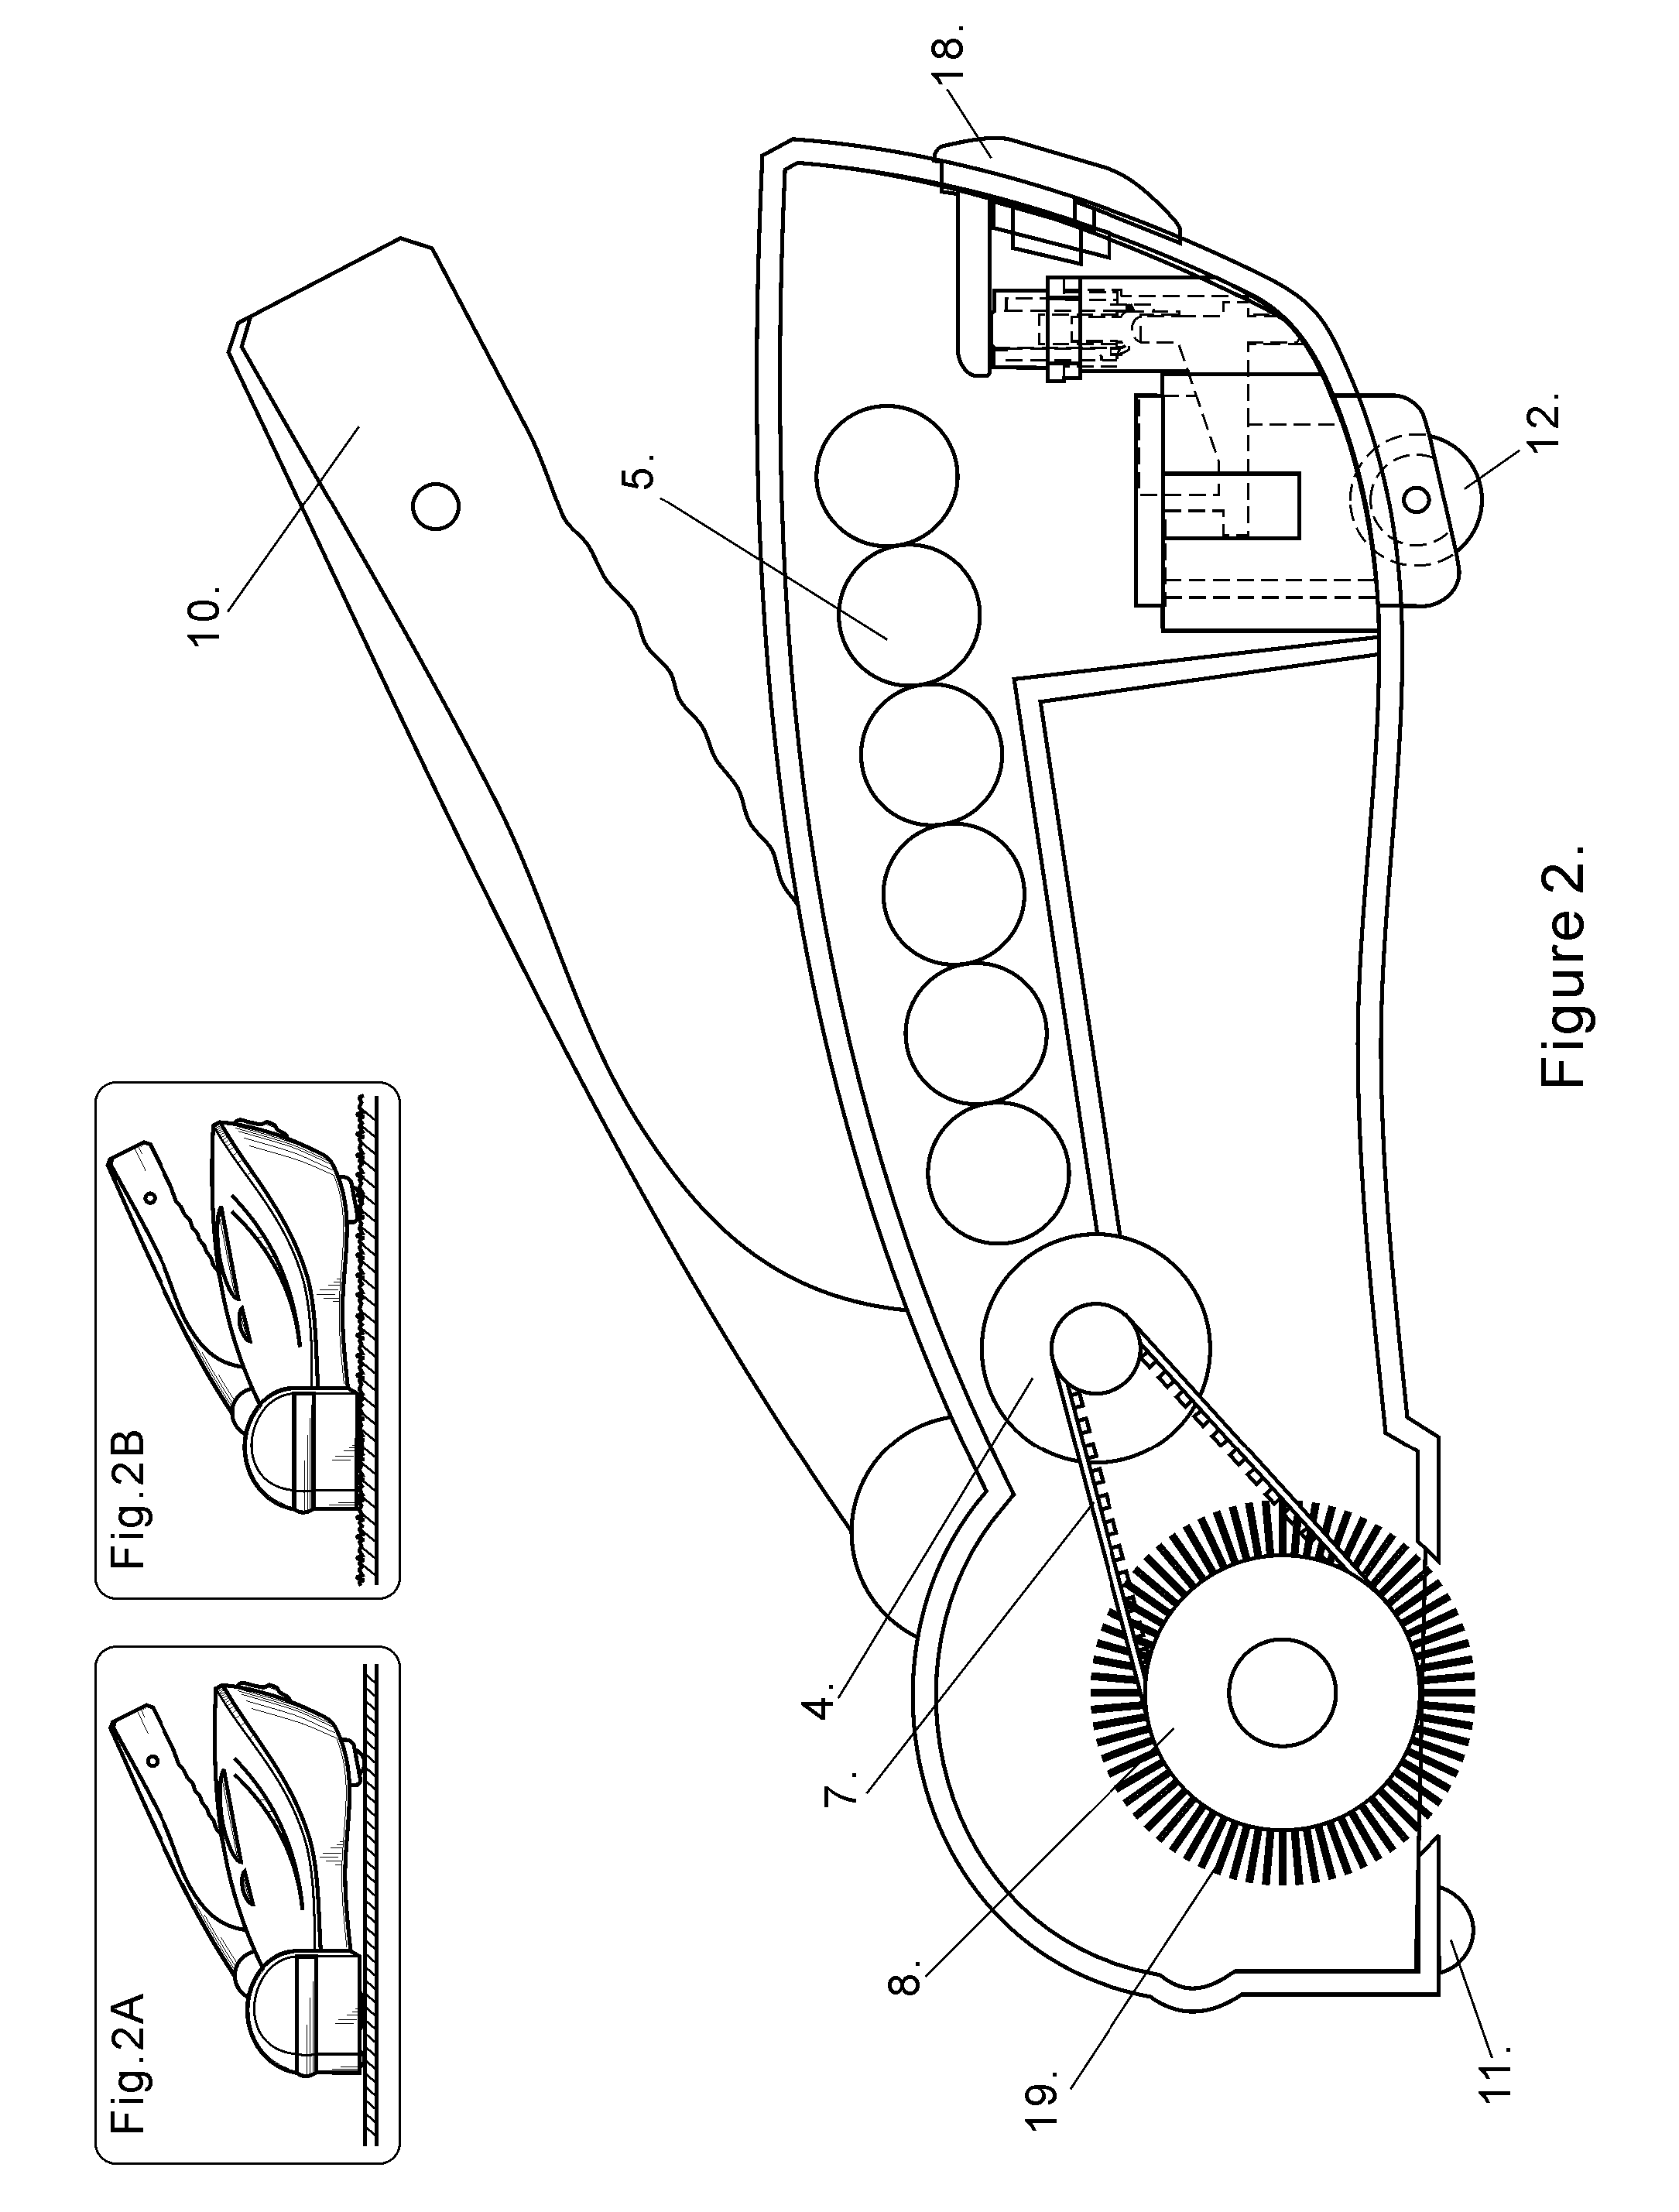 Surface-Cleaning Apparatus with Height Adjustable Base